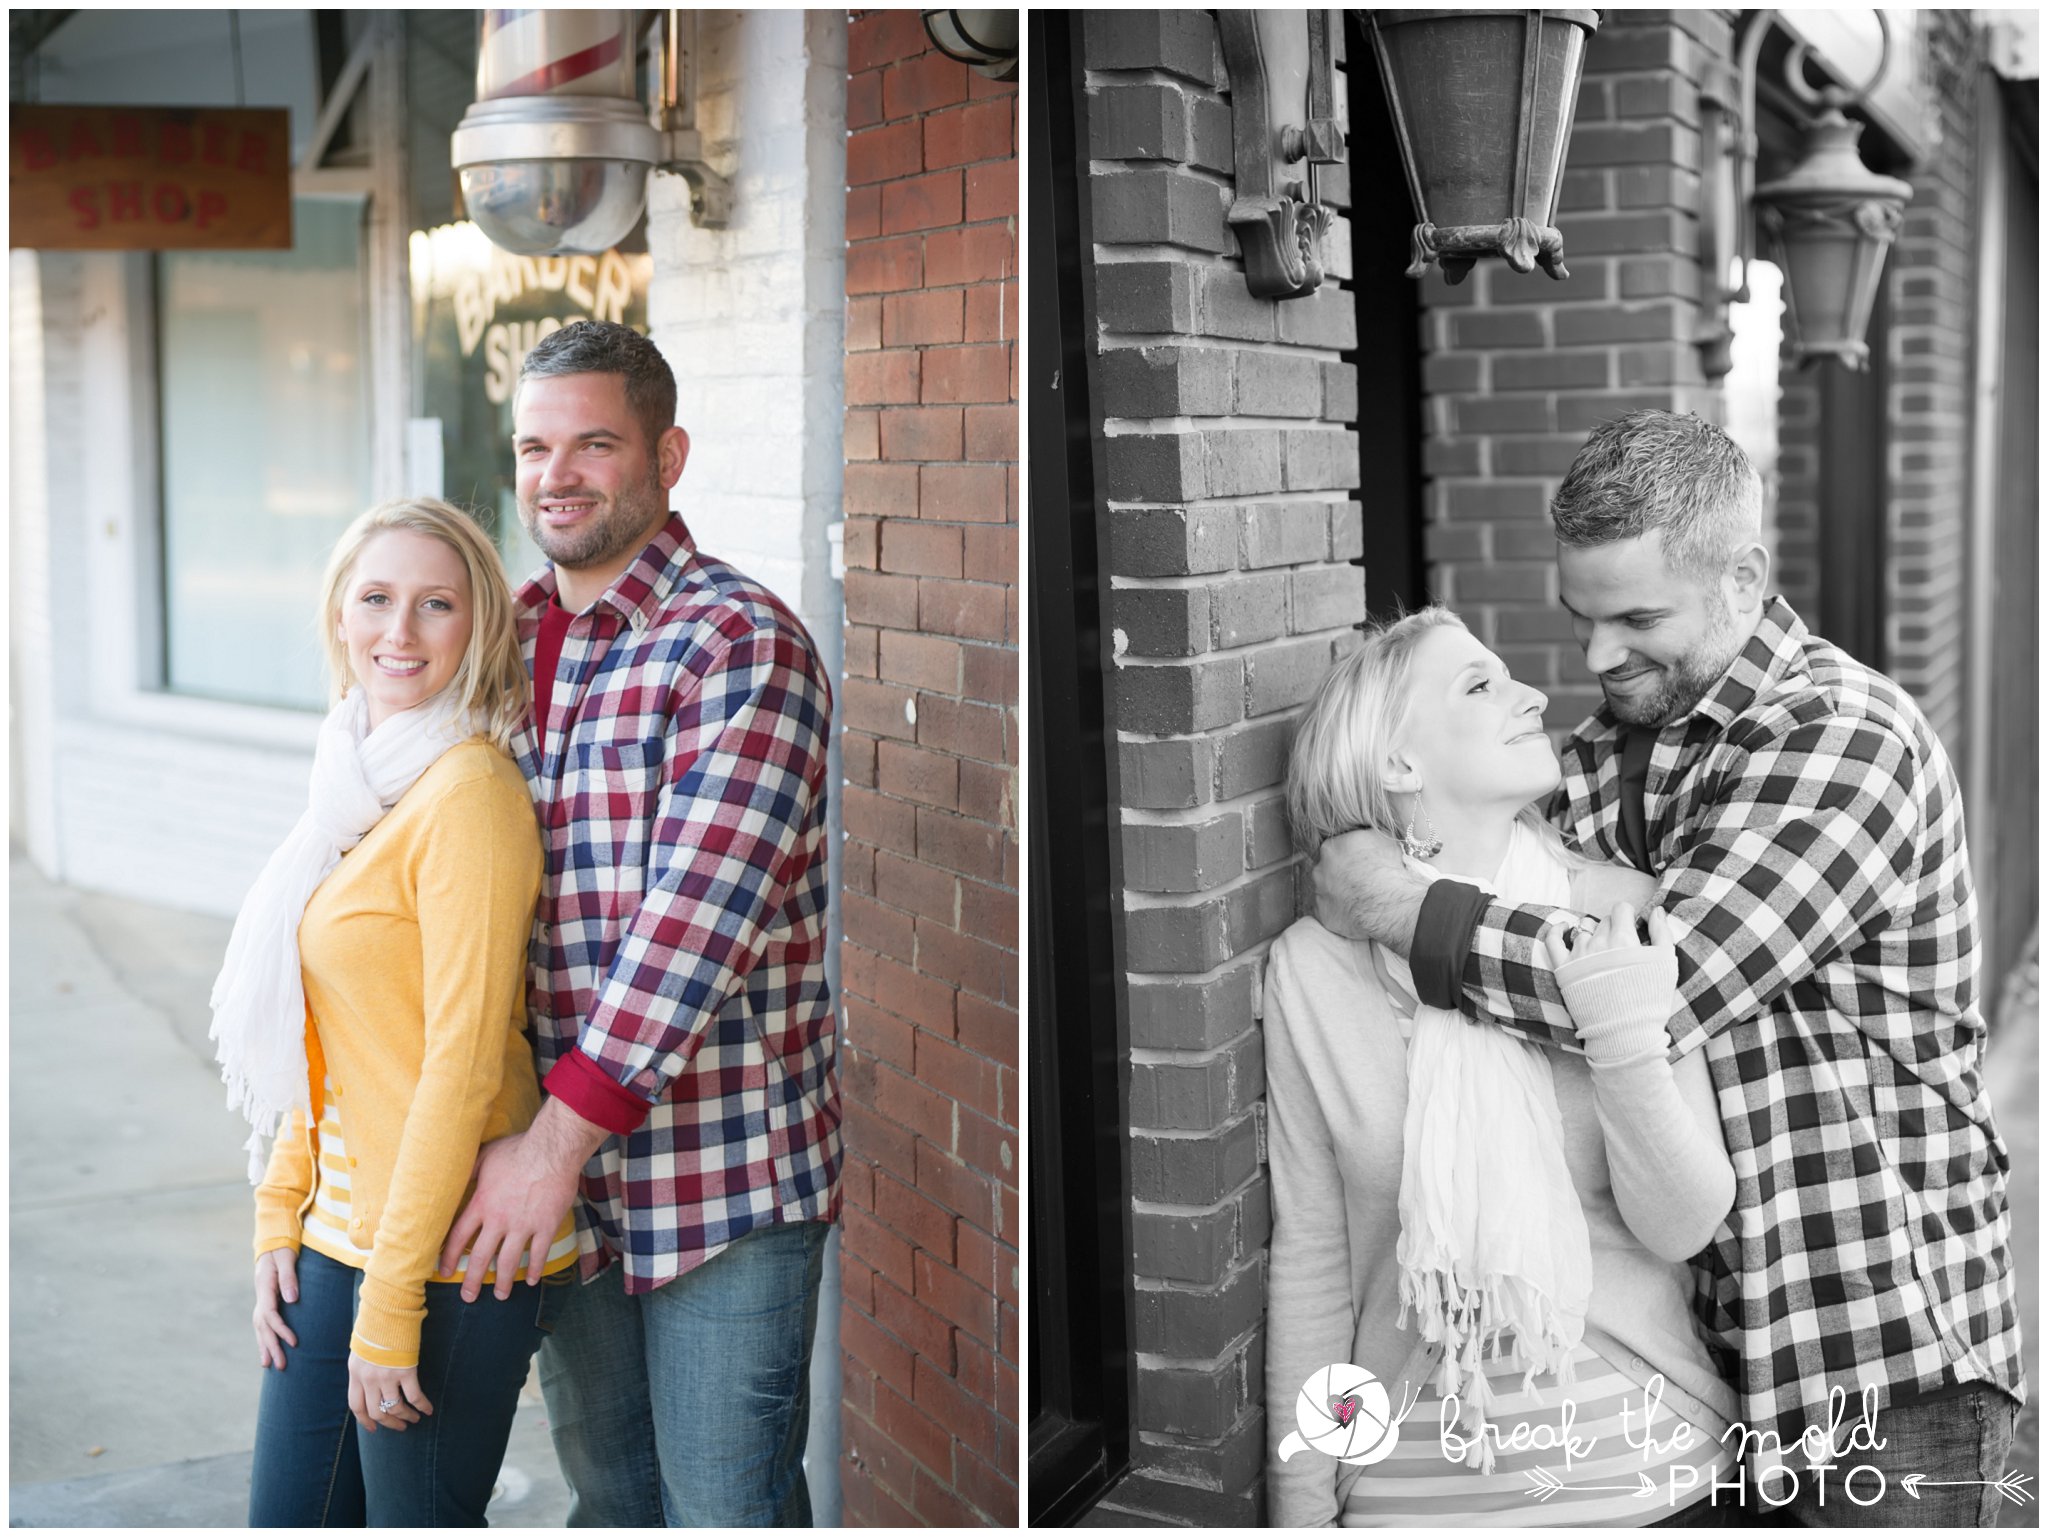 break-the-mold-photo-knoxville-tn-lenoir-city-downtown-outdoor-hiking-engagement-session_2016.jpg